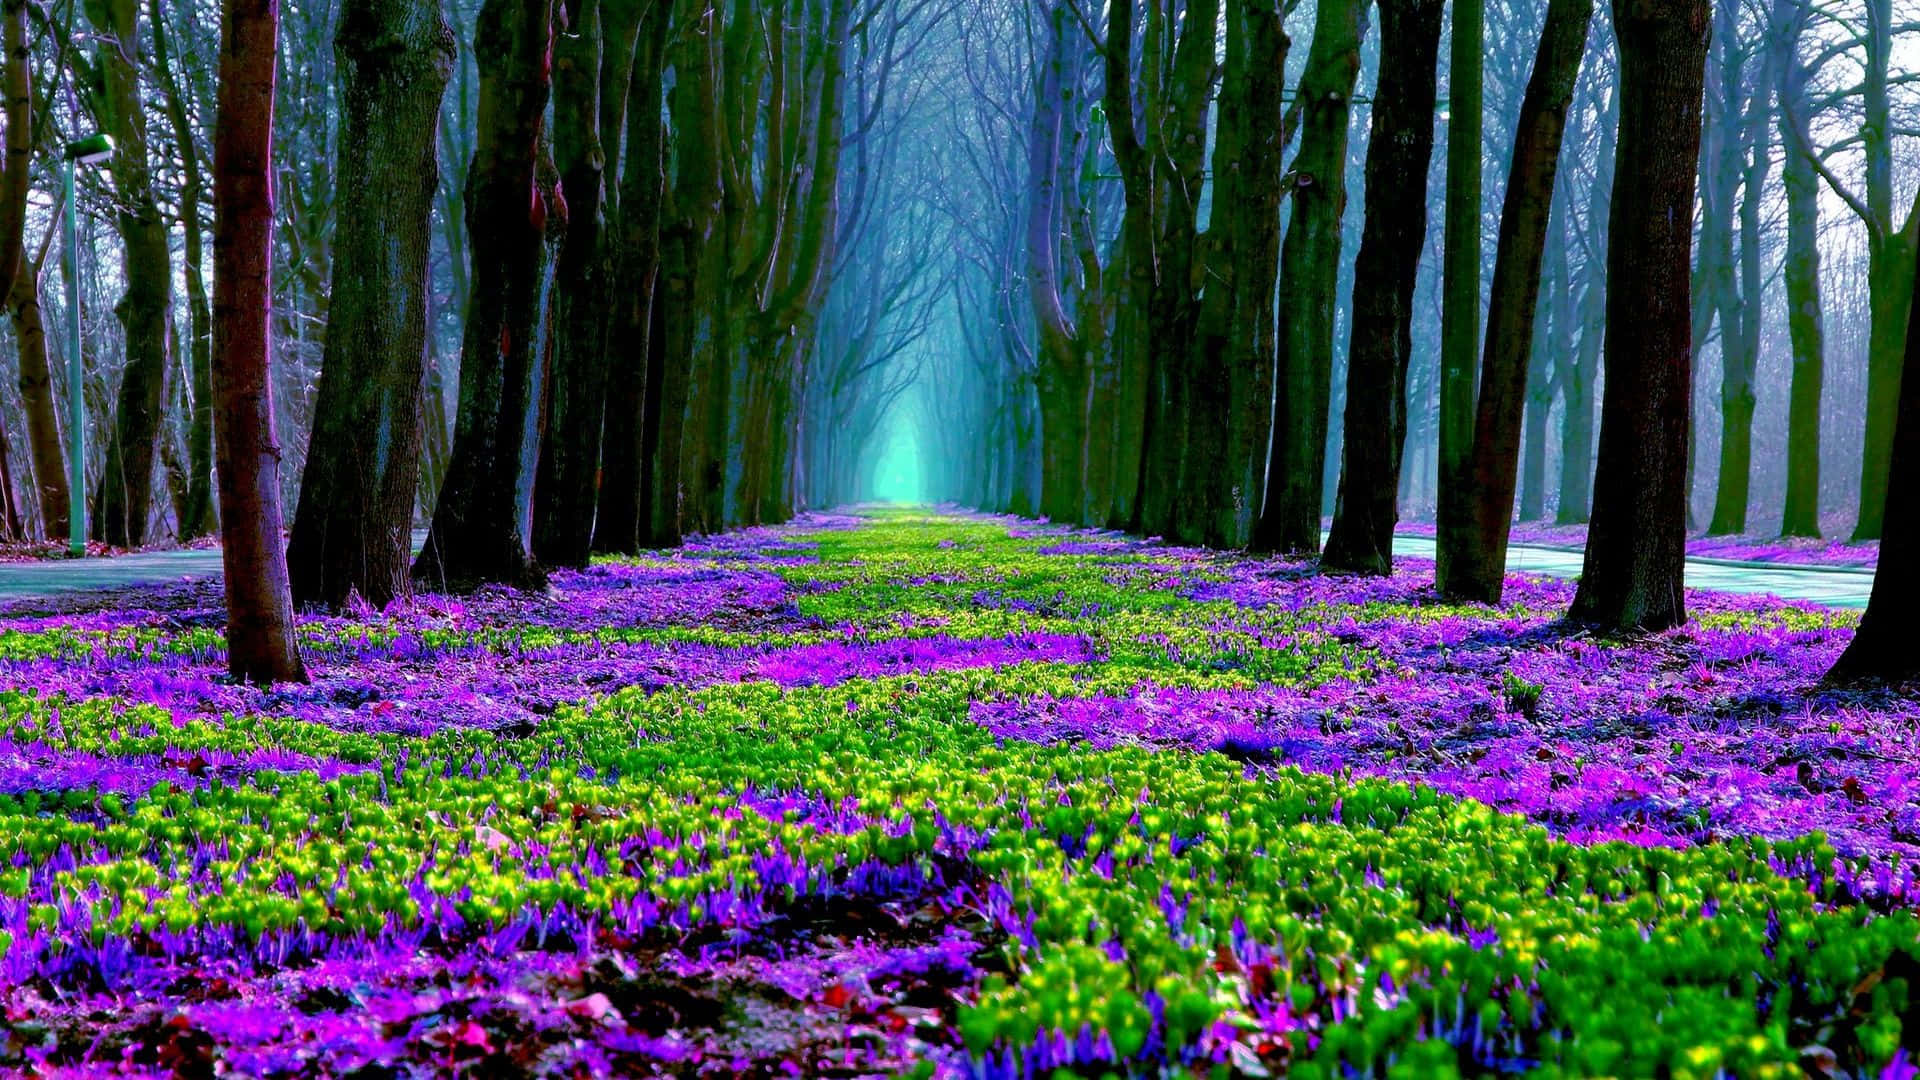 A serene forest path with blooming spring wildflowers